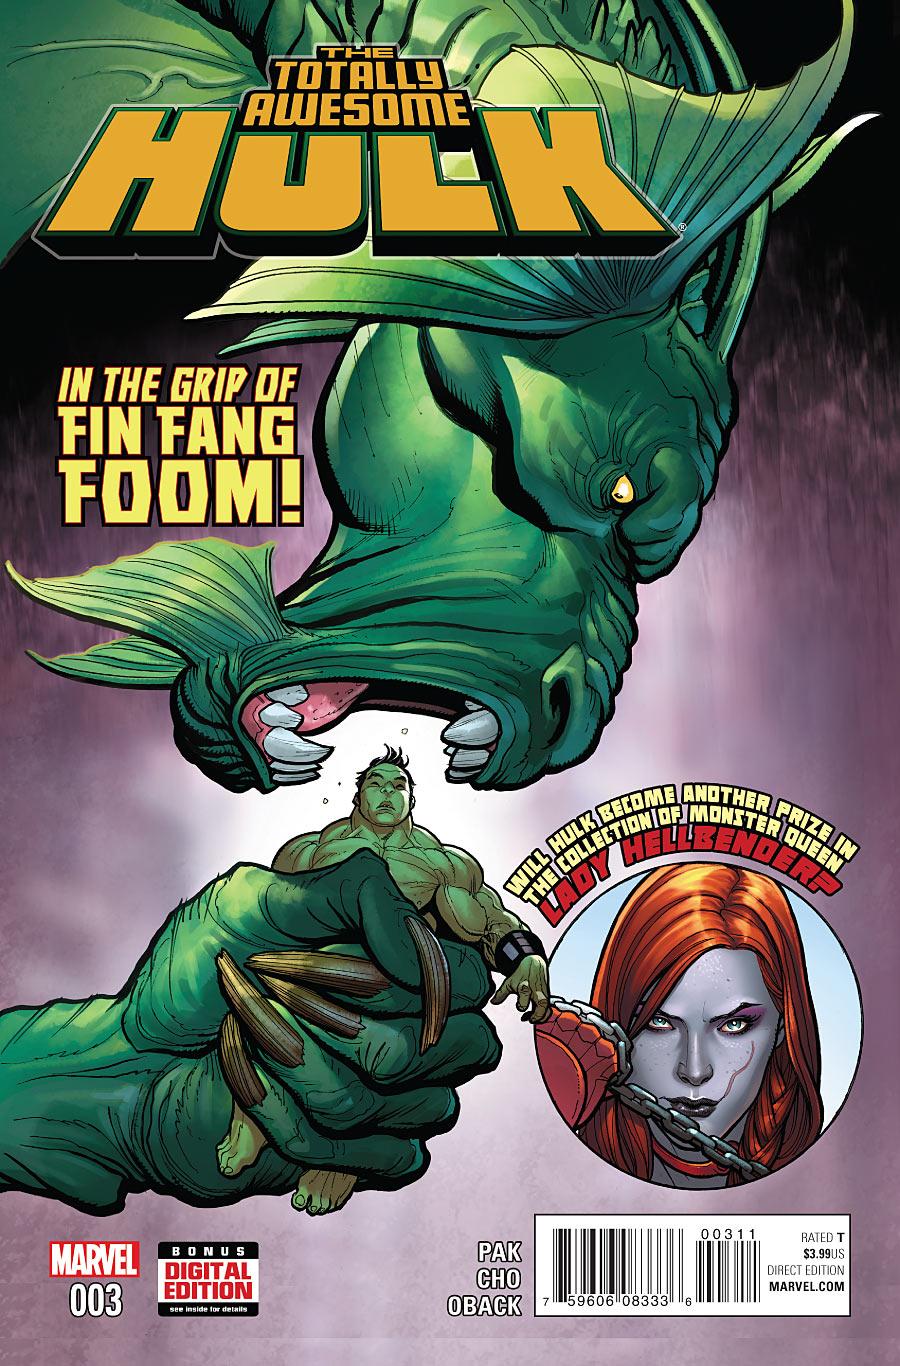 Totally Awesome Hulk Vol. 1 #3